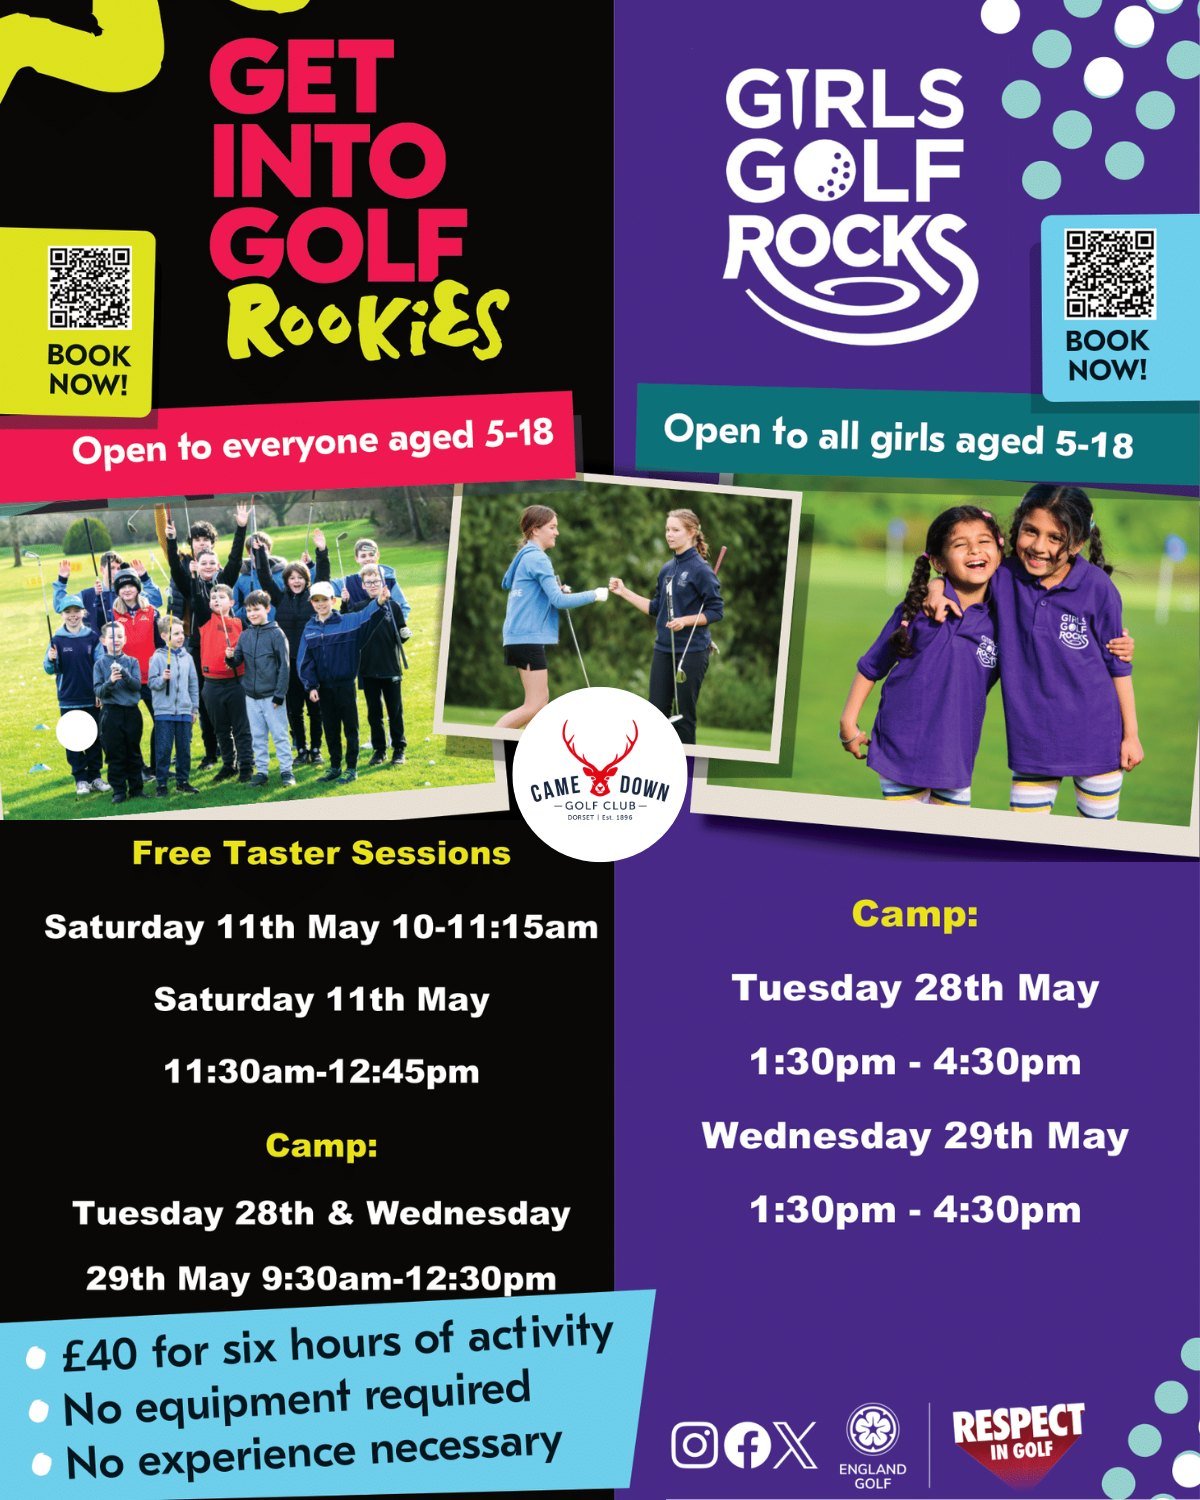 ⛳️ FREE Junior Taster Sessions - Saturday 11th May ⛳️ Came Down Golf Club are delighted to be hosting two England Golf junior coaching initiatives - Girls Golf Rocks and Get Into Golf Rookies suitable for children aged between 5 and 17! No experience